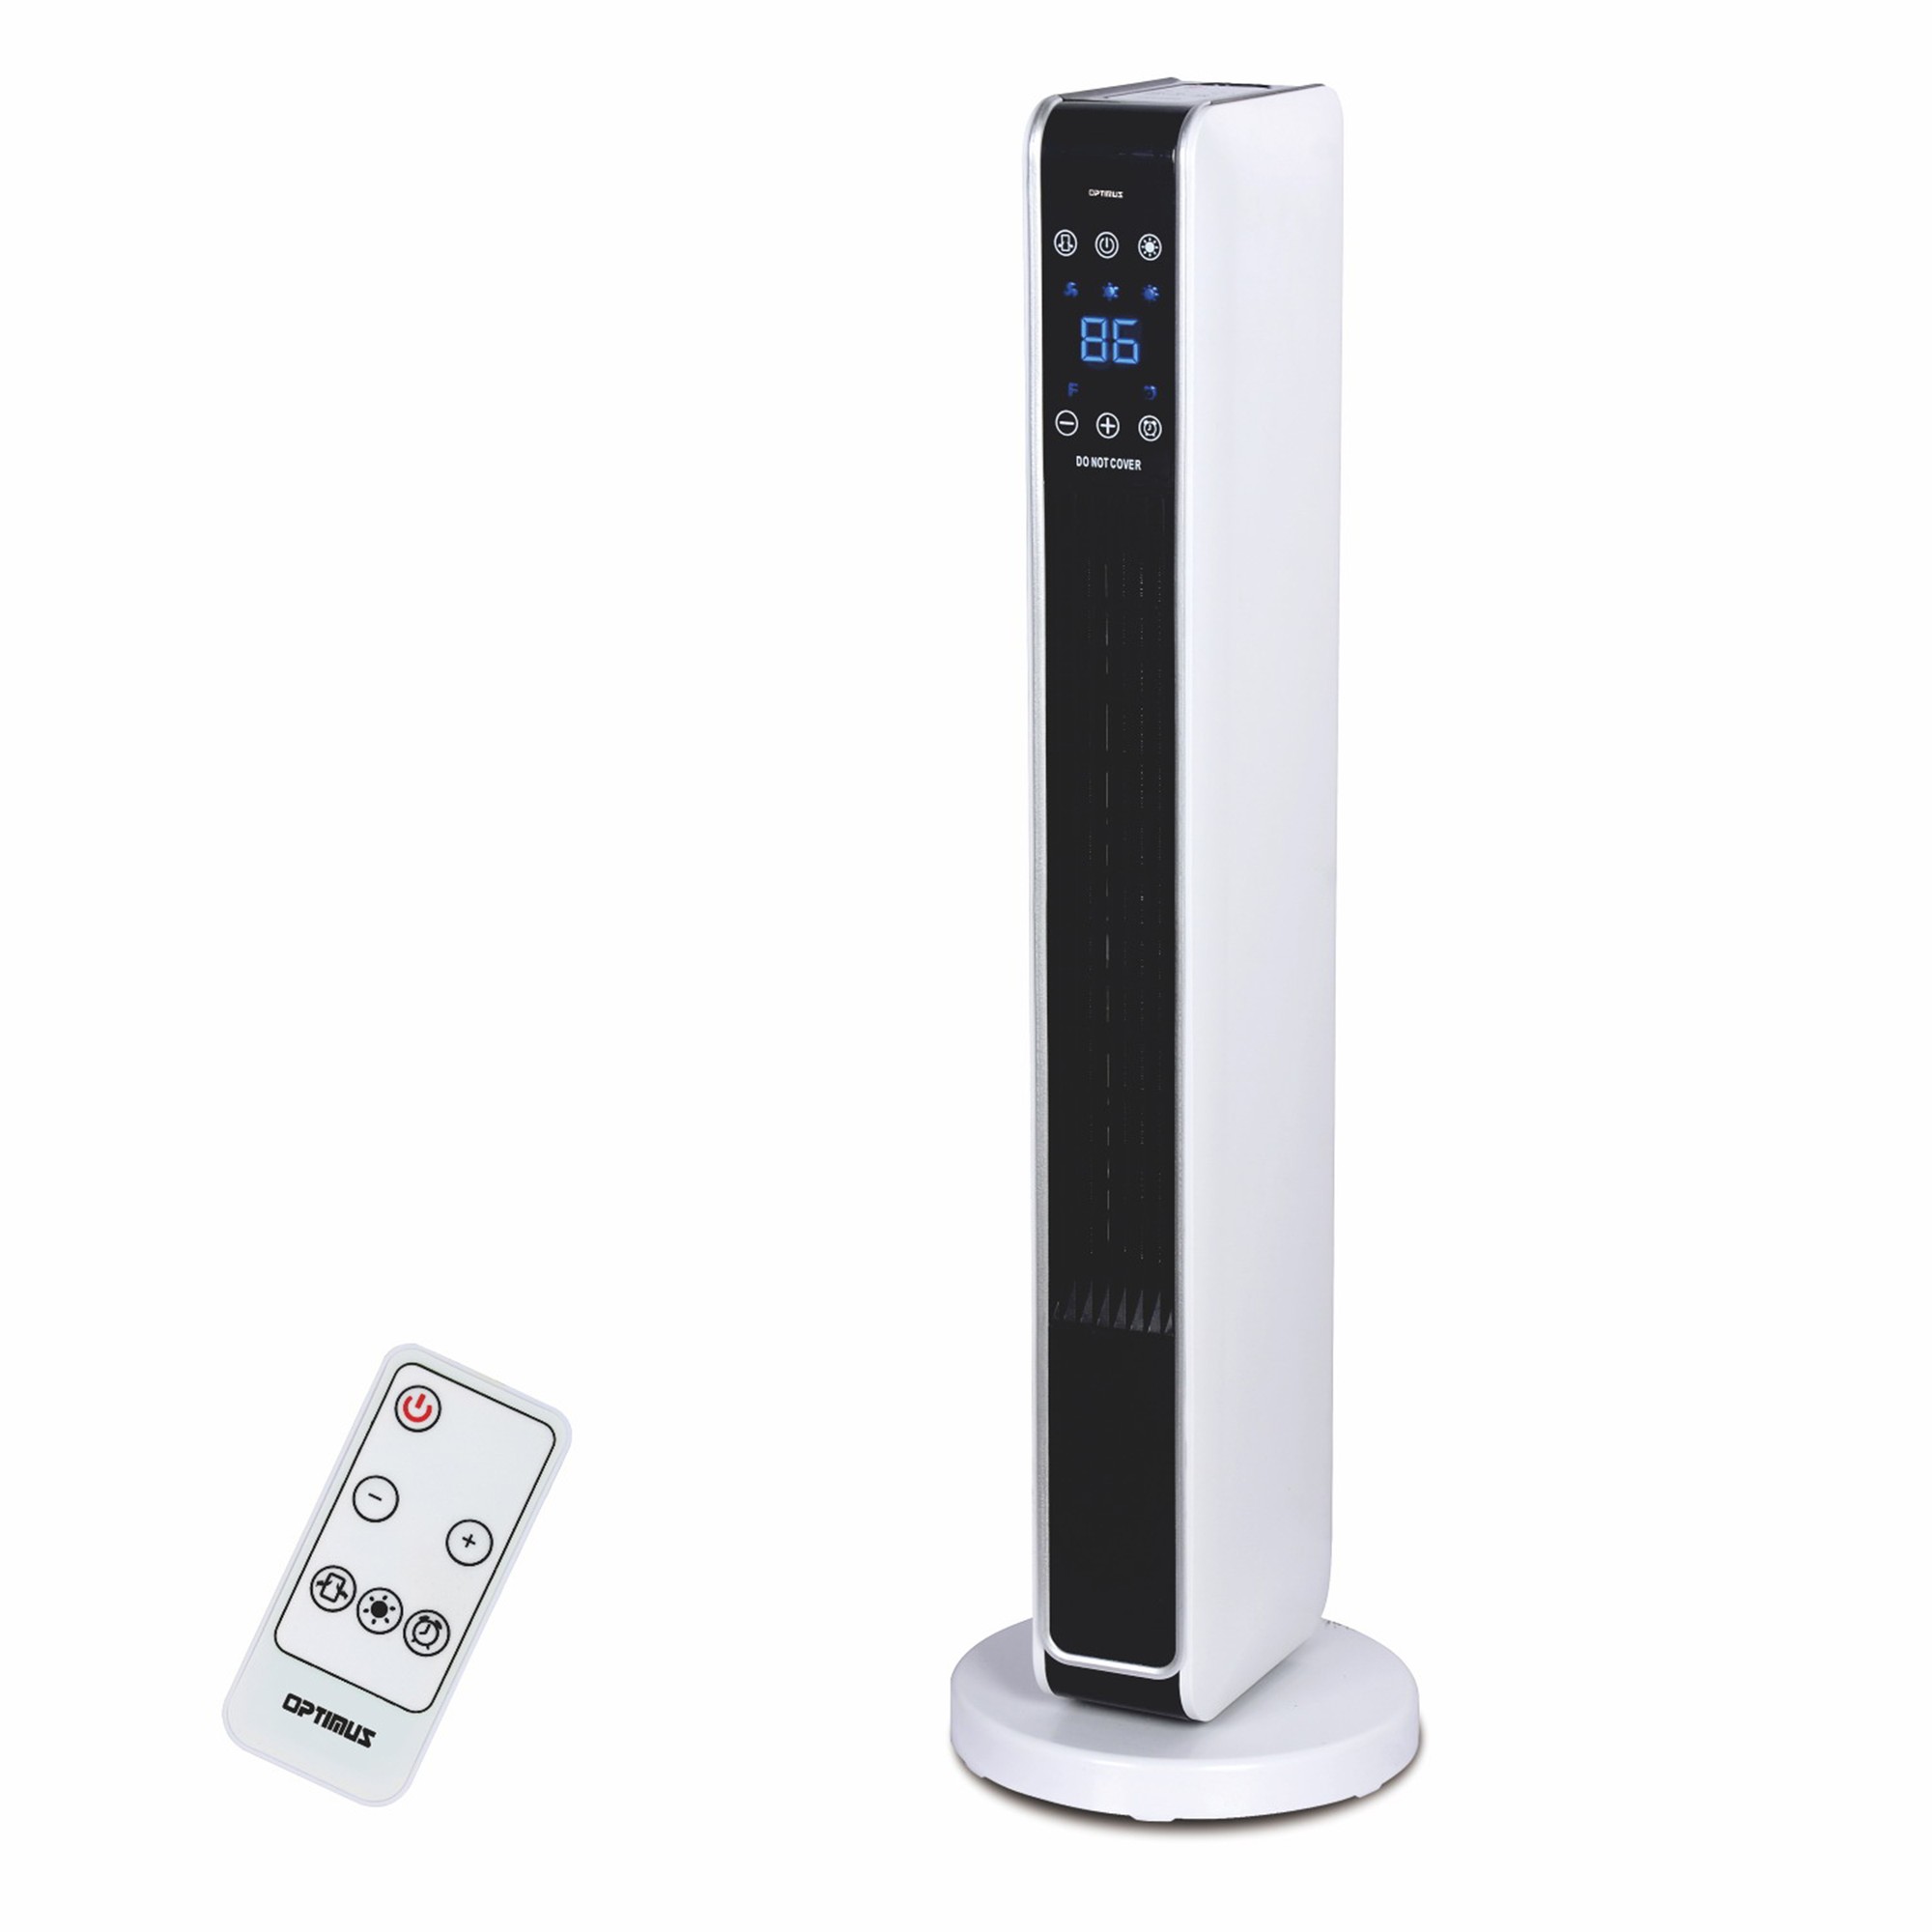 Optimus H7329 29 Inch Oscillating Tower Heater With Remote